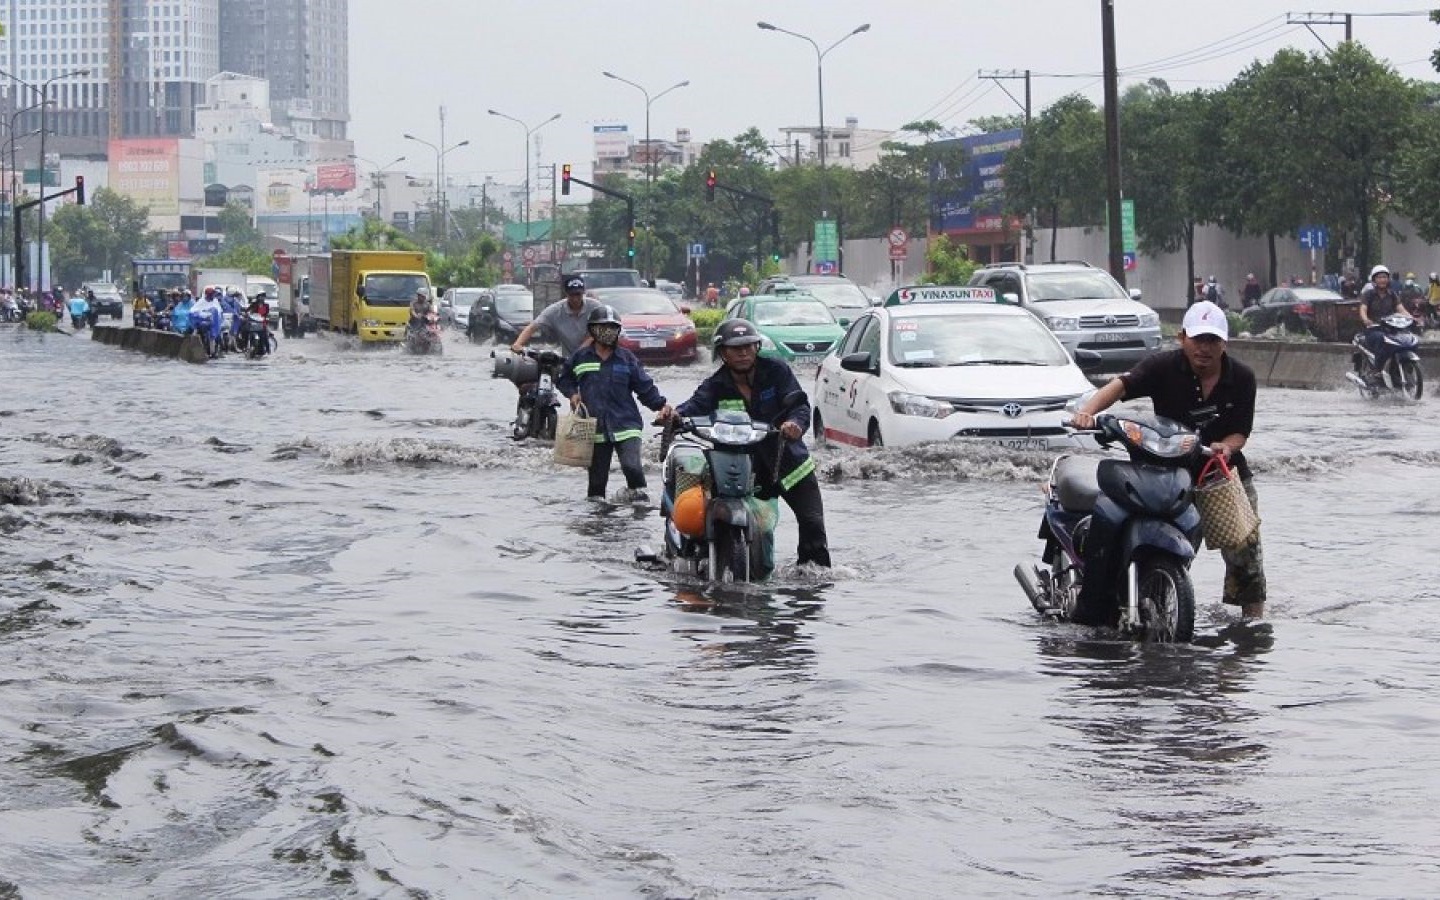 Experience riding a motorbike through a flooded area to avoid stalling